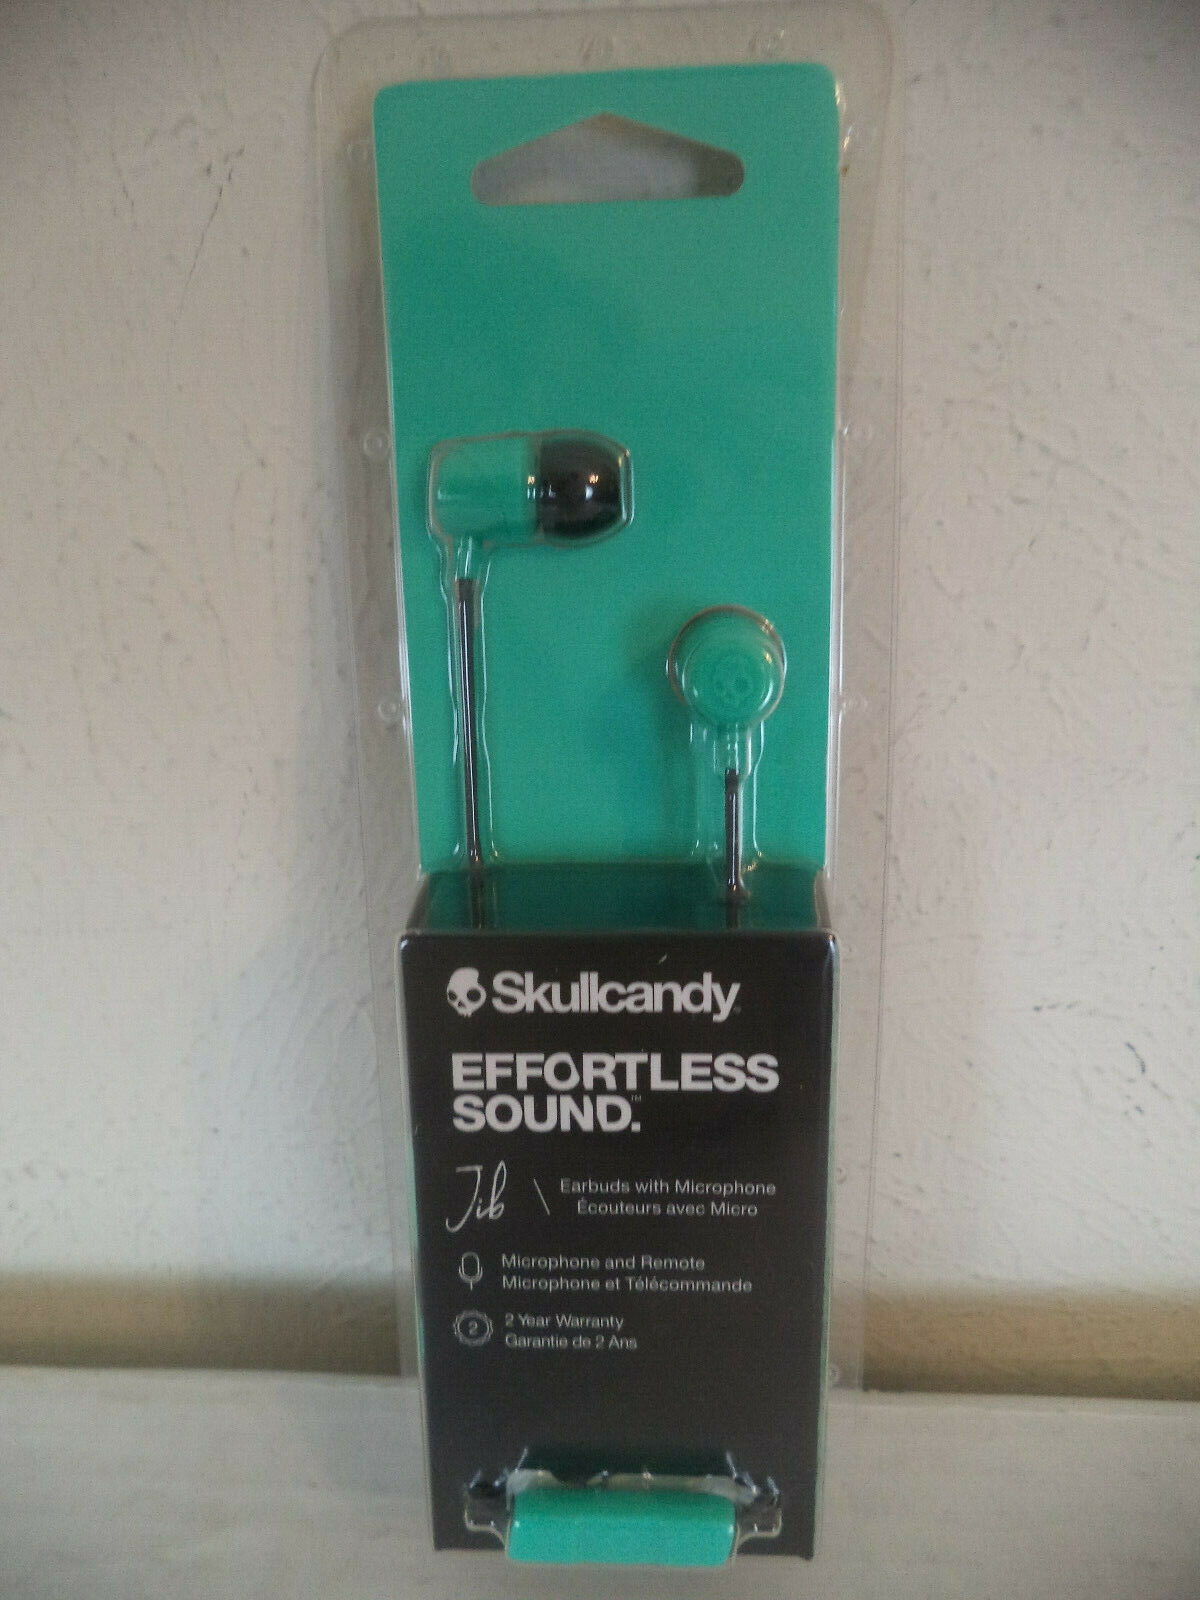 Green/ Black Skullcandy Earbud with Microphone. - $11.88